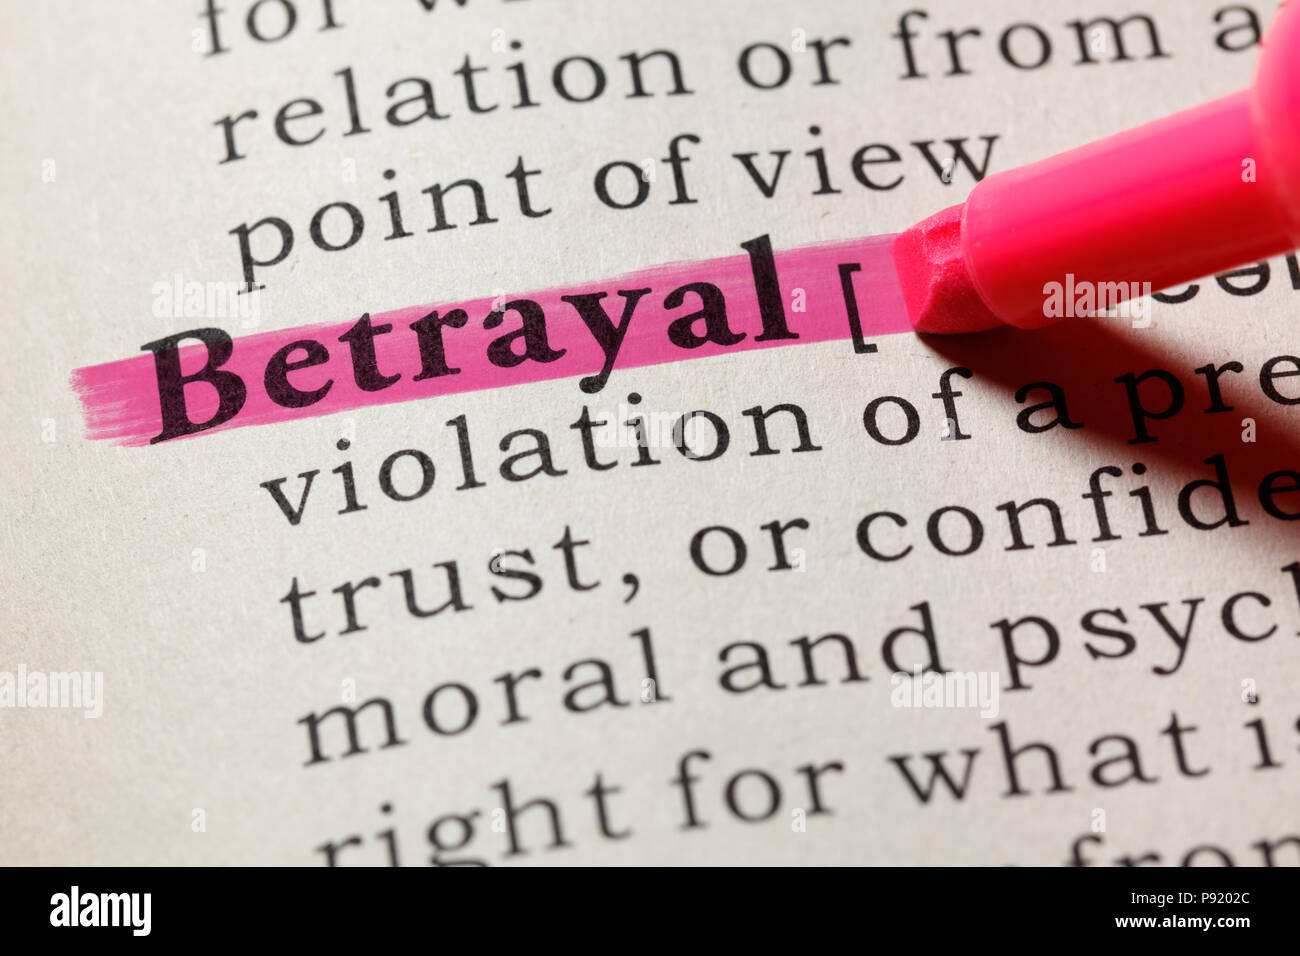 Fake Dictionary, Dictionary definition of the word betrayal. including key descriptive words. Stock Photo